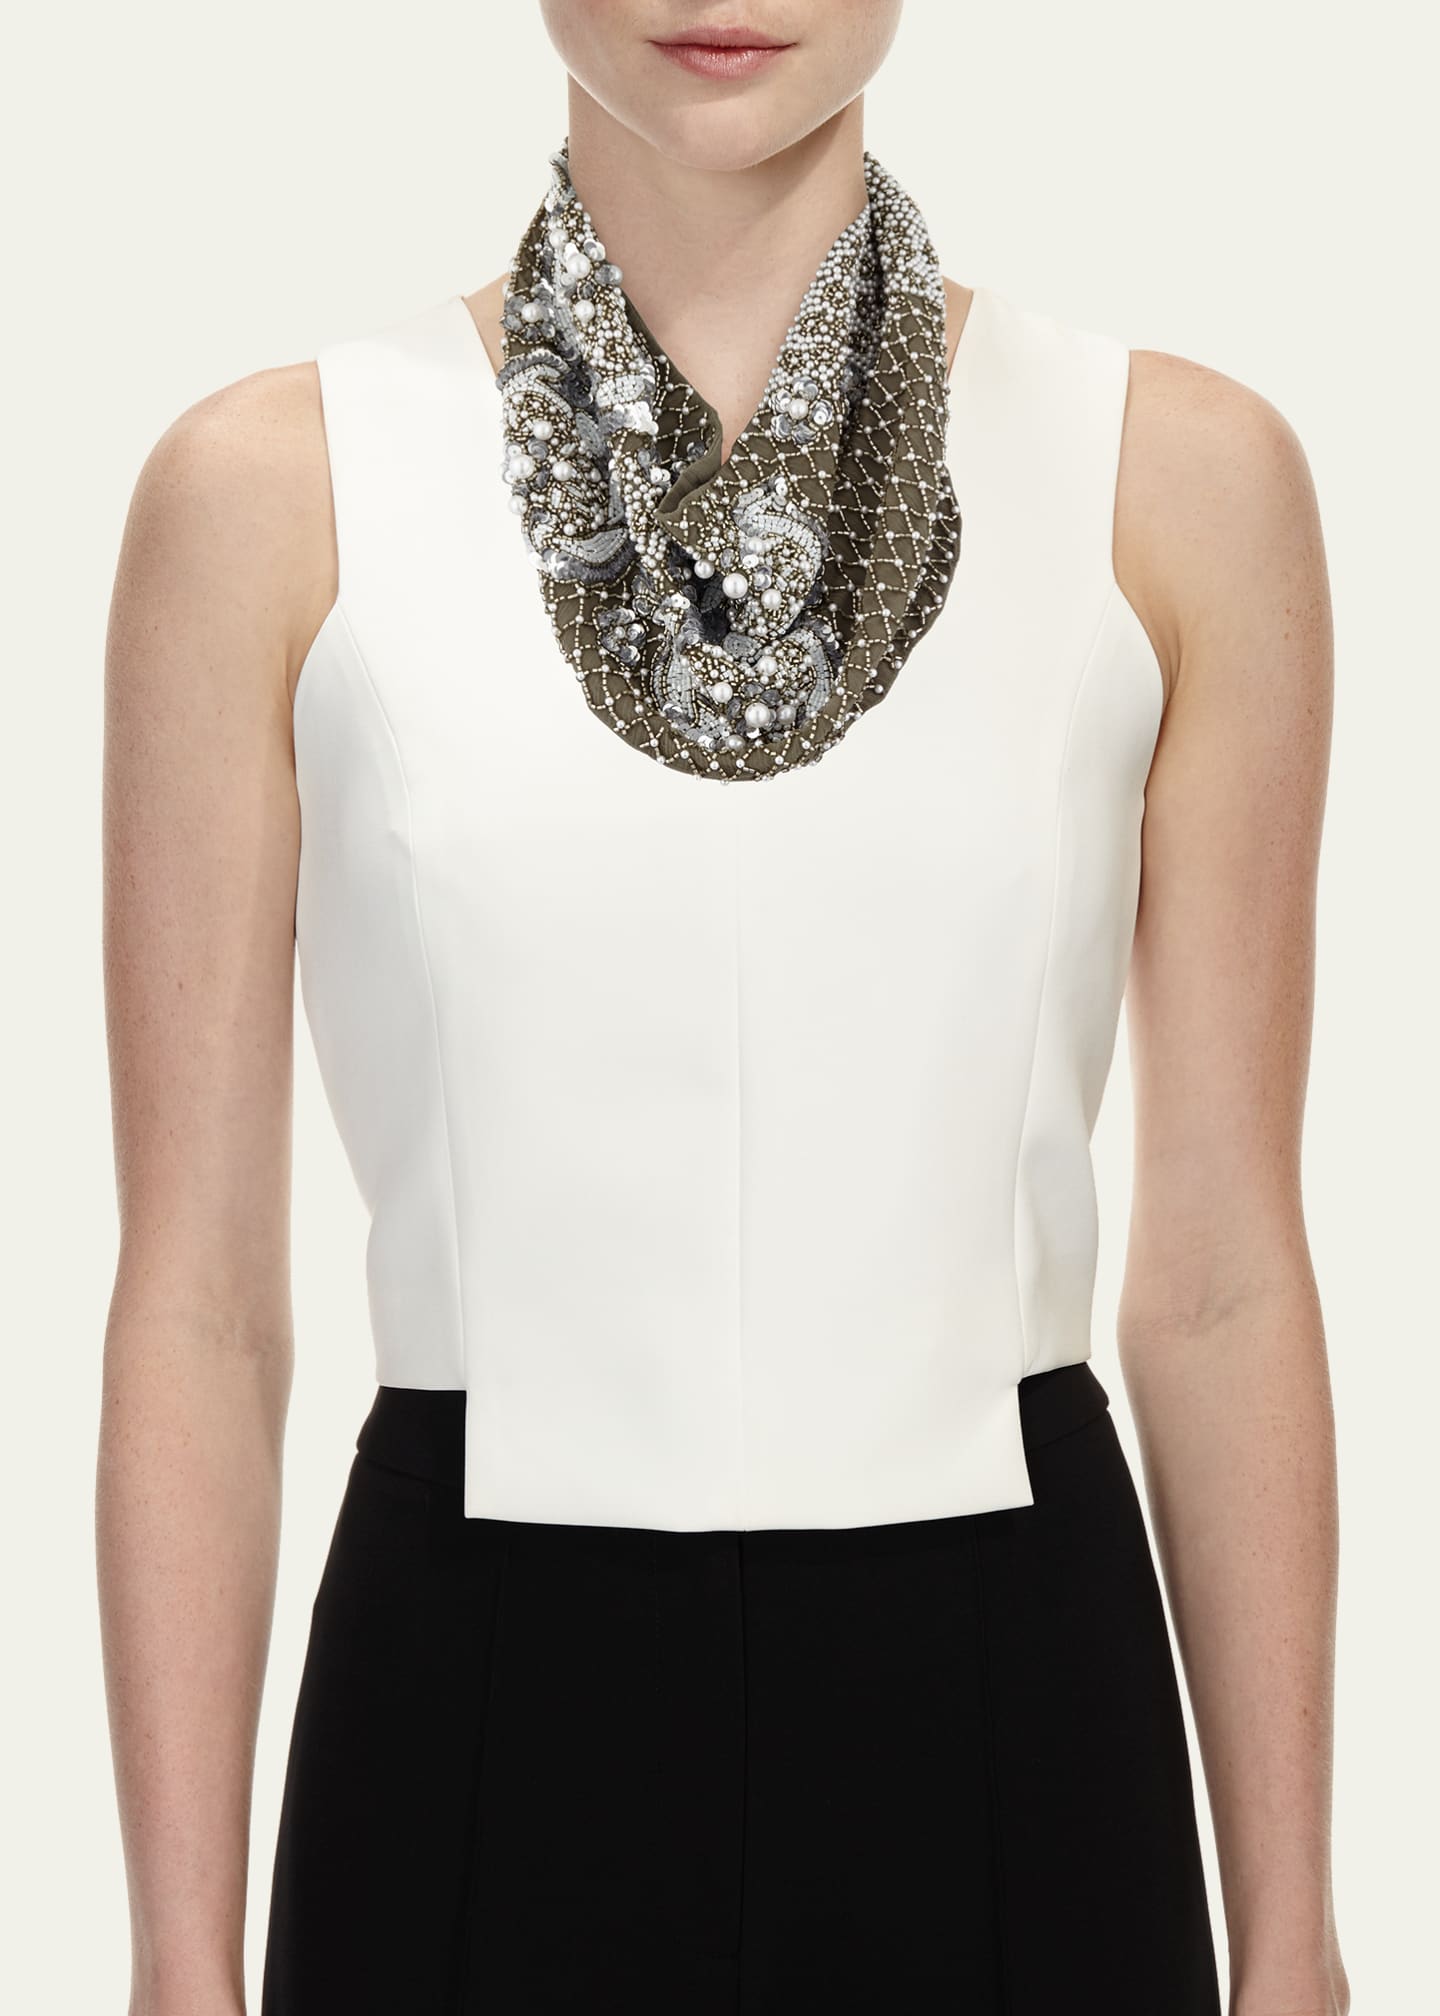 Mignonne Gavigan Le Charlot Beaded Scarf Necklace, Gray Image 2 of 2